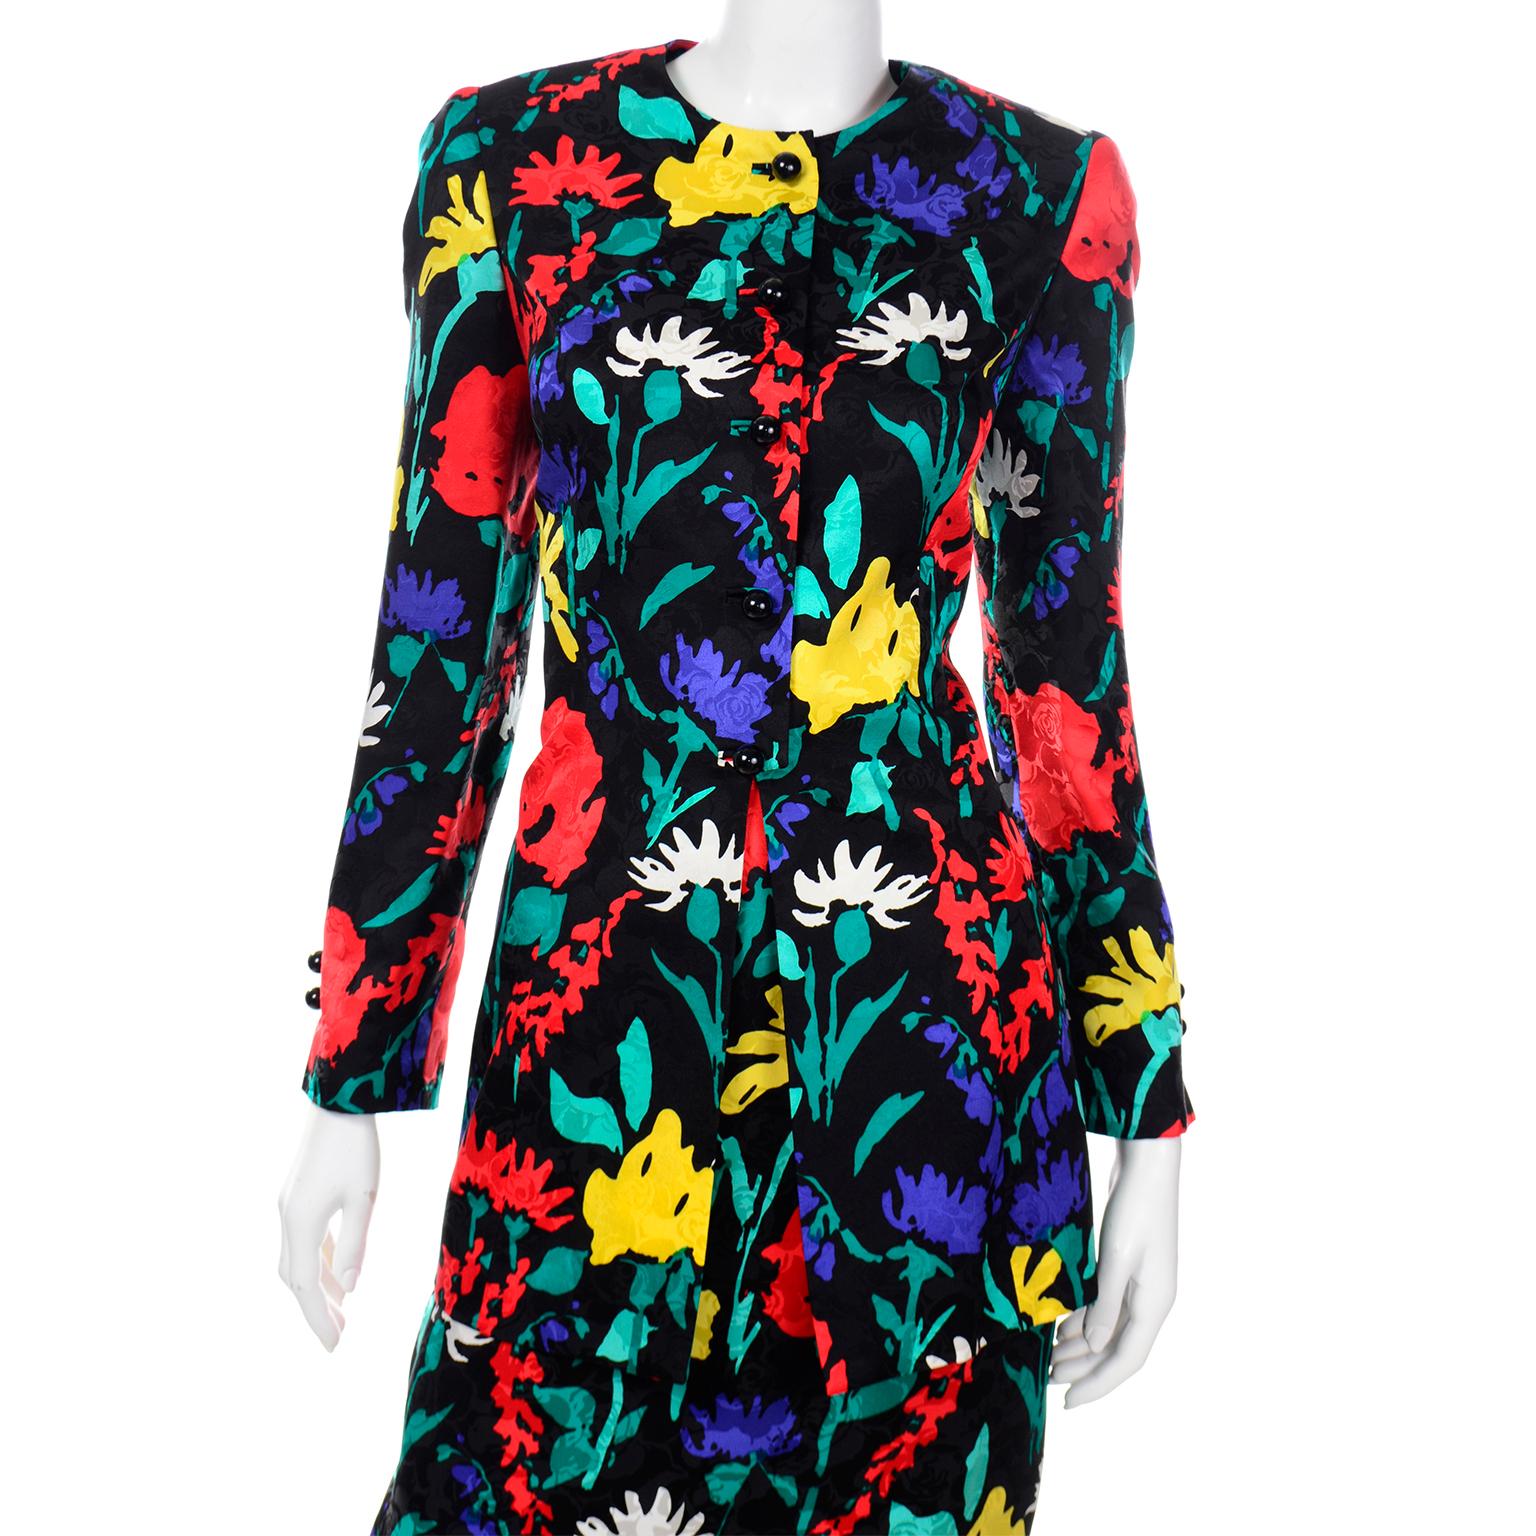 Women's Colorful David Hayes Silk Floral Print Vintage Jacket and Skirt Suit